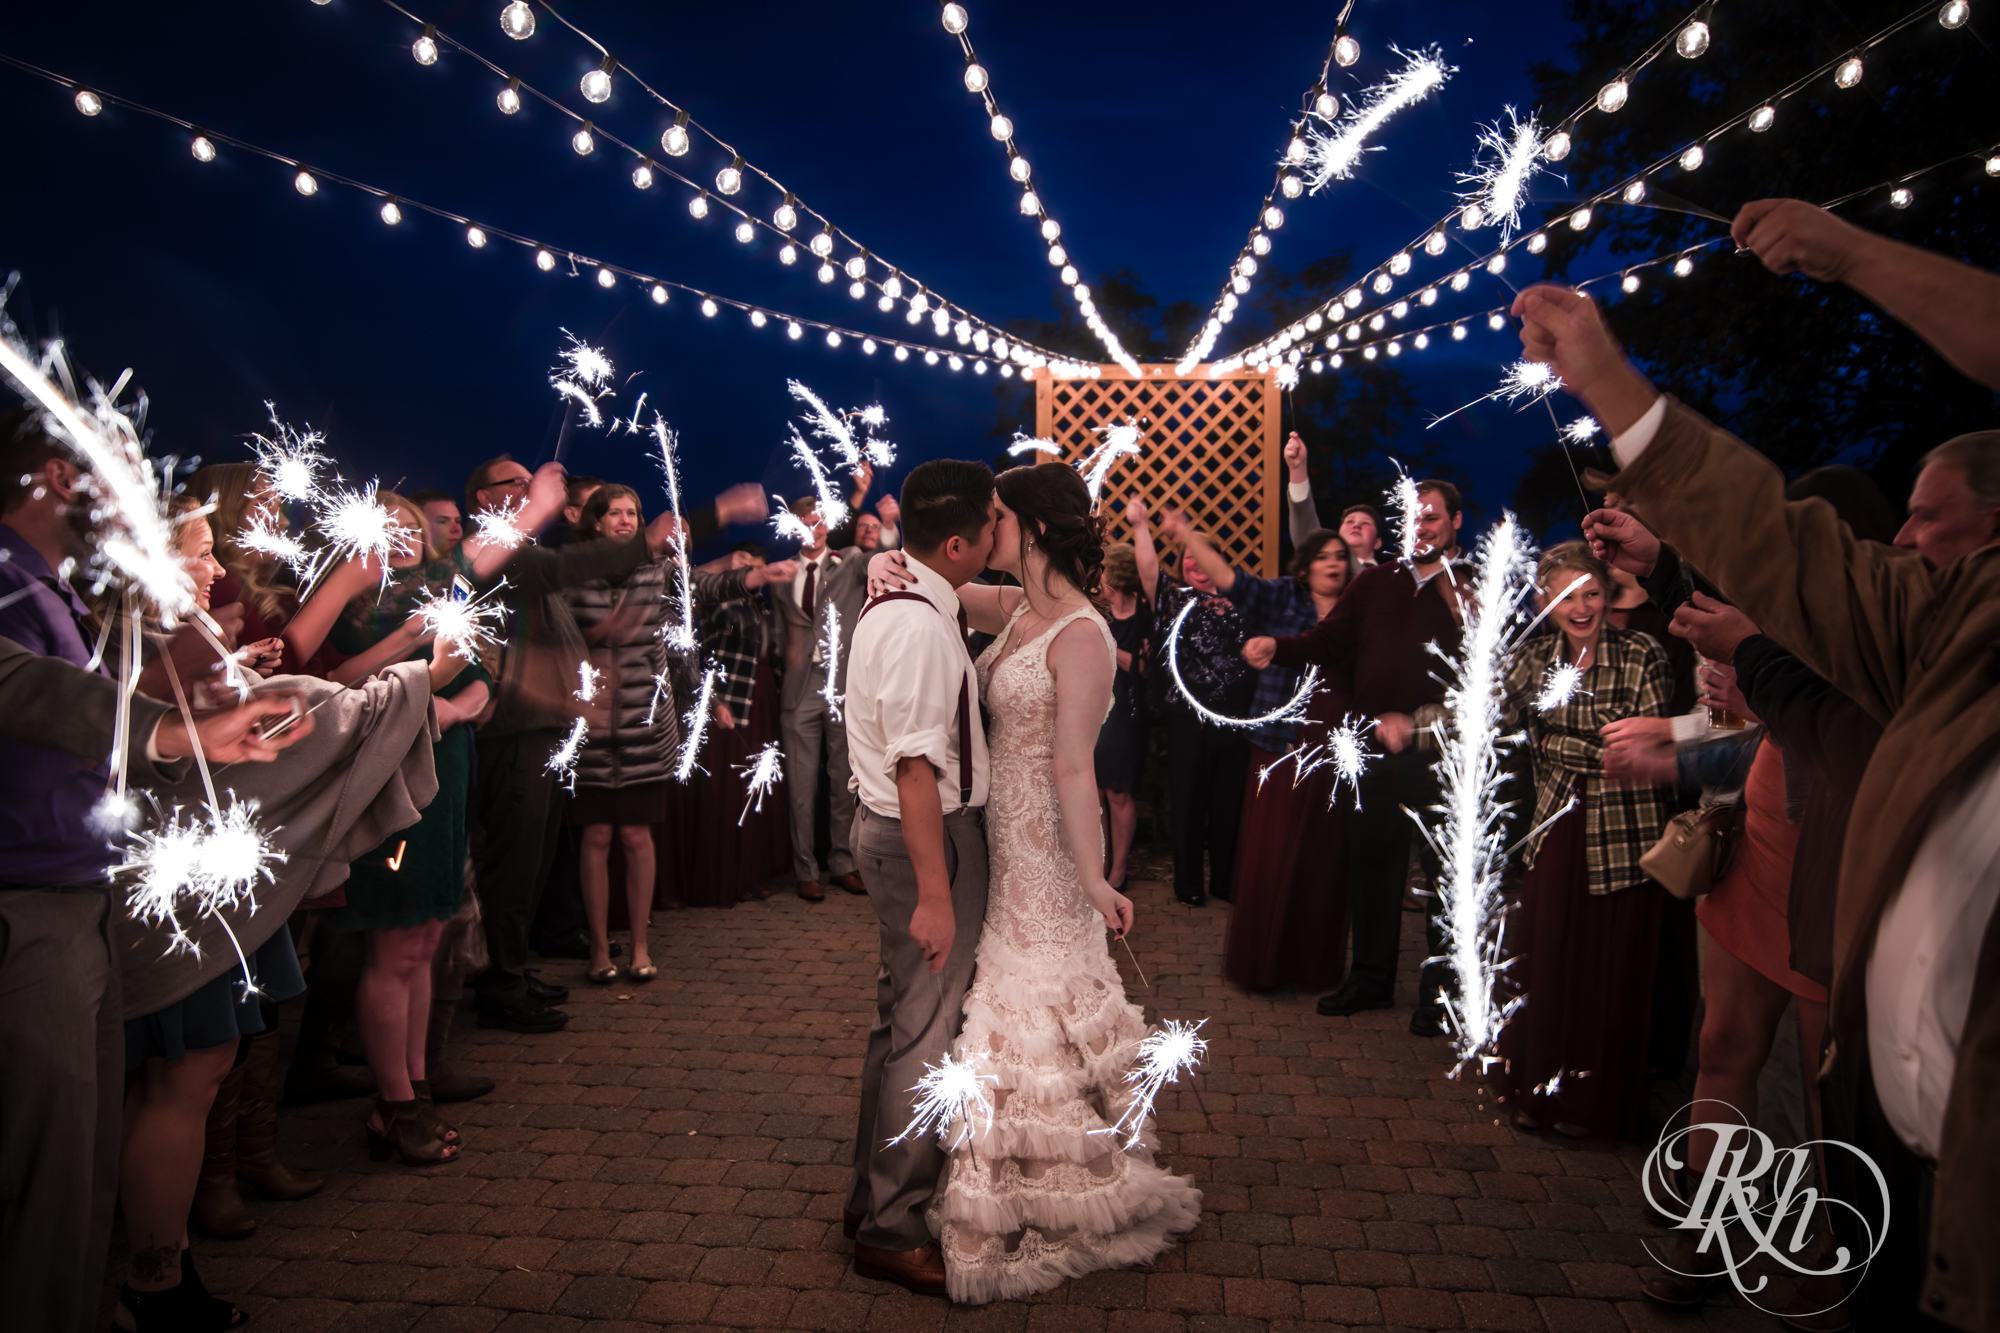 Bride and groom kiss surrounded by sparklers at Grand Superior Lodge in Two Harbors, Minnesota.